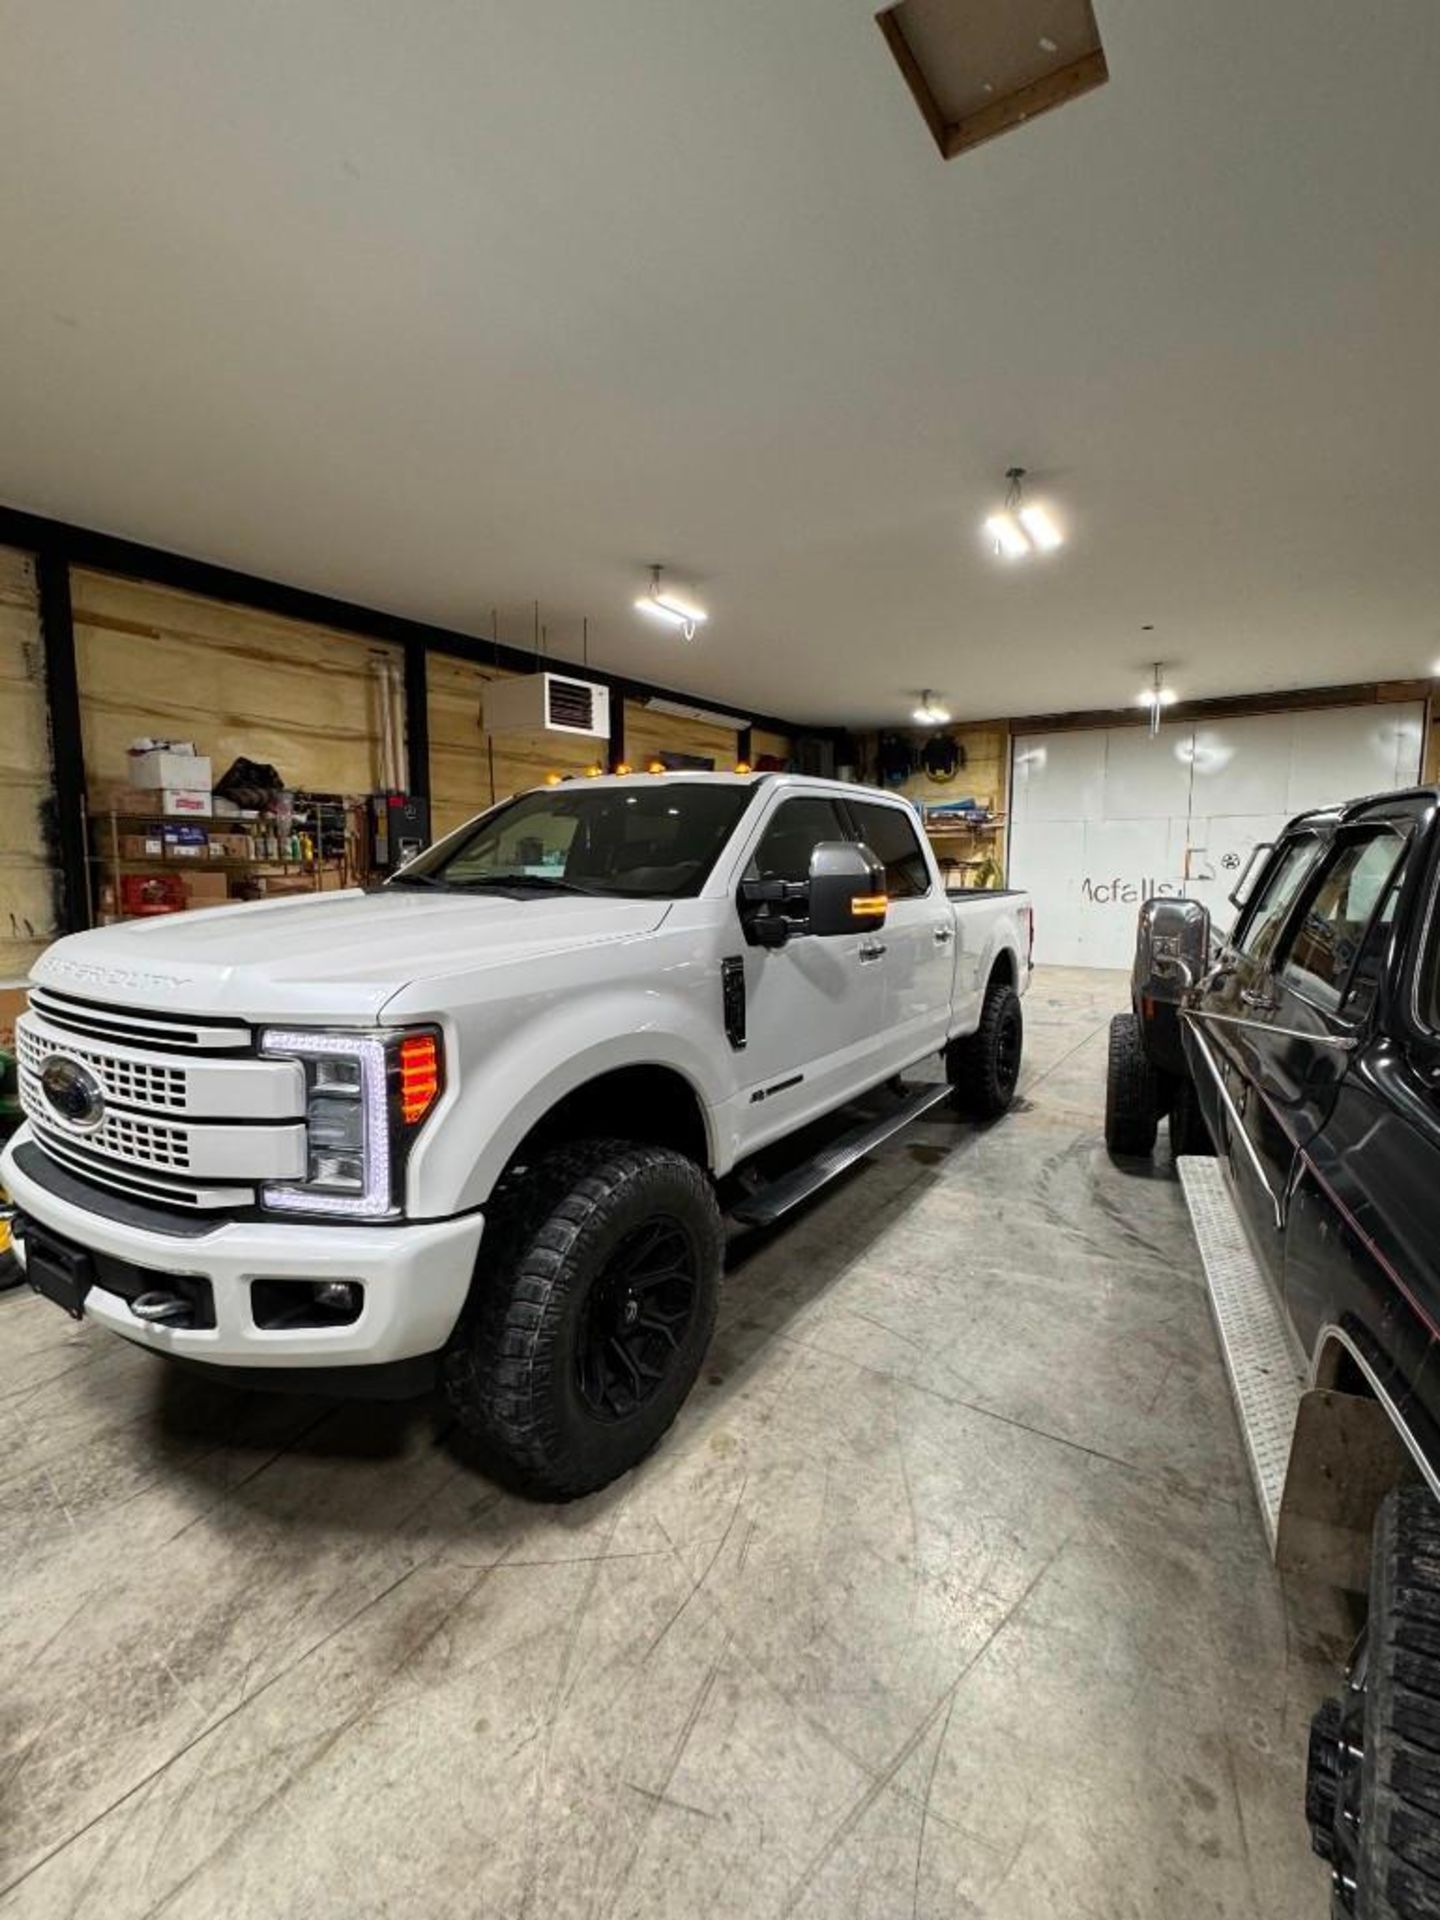 2017 Ford F-250 Pickup Truck (located off-site, please read description) - Image 9 of 17